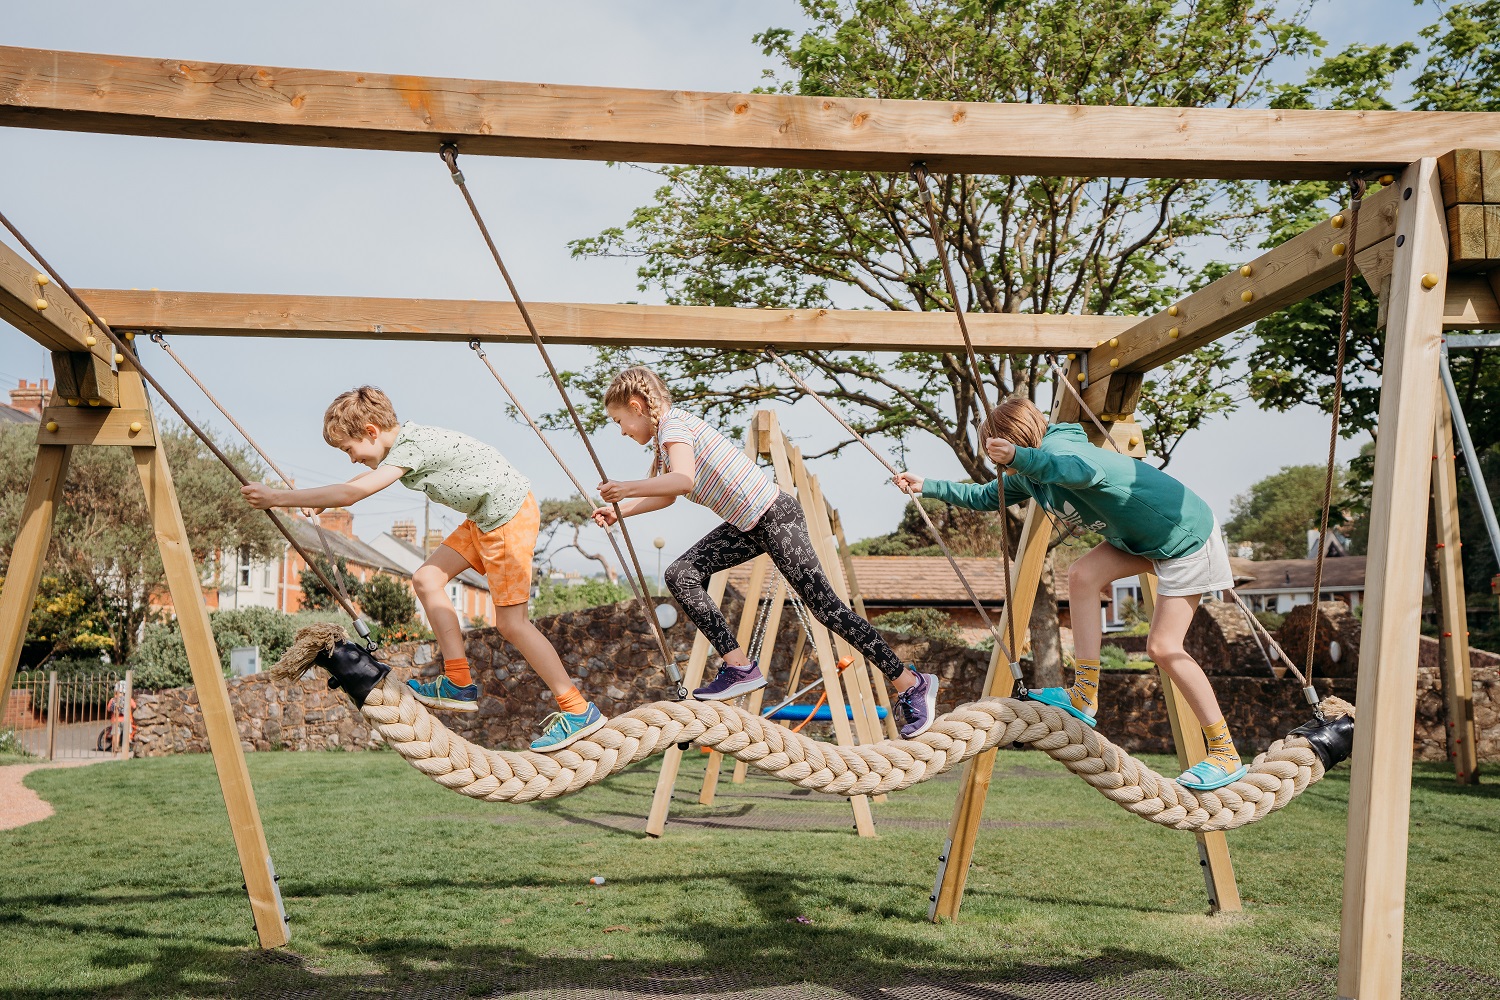 Snake Rope Swing with three children playing on it